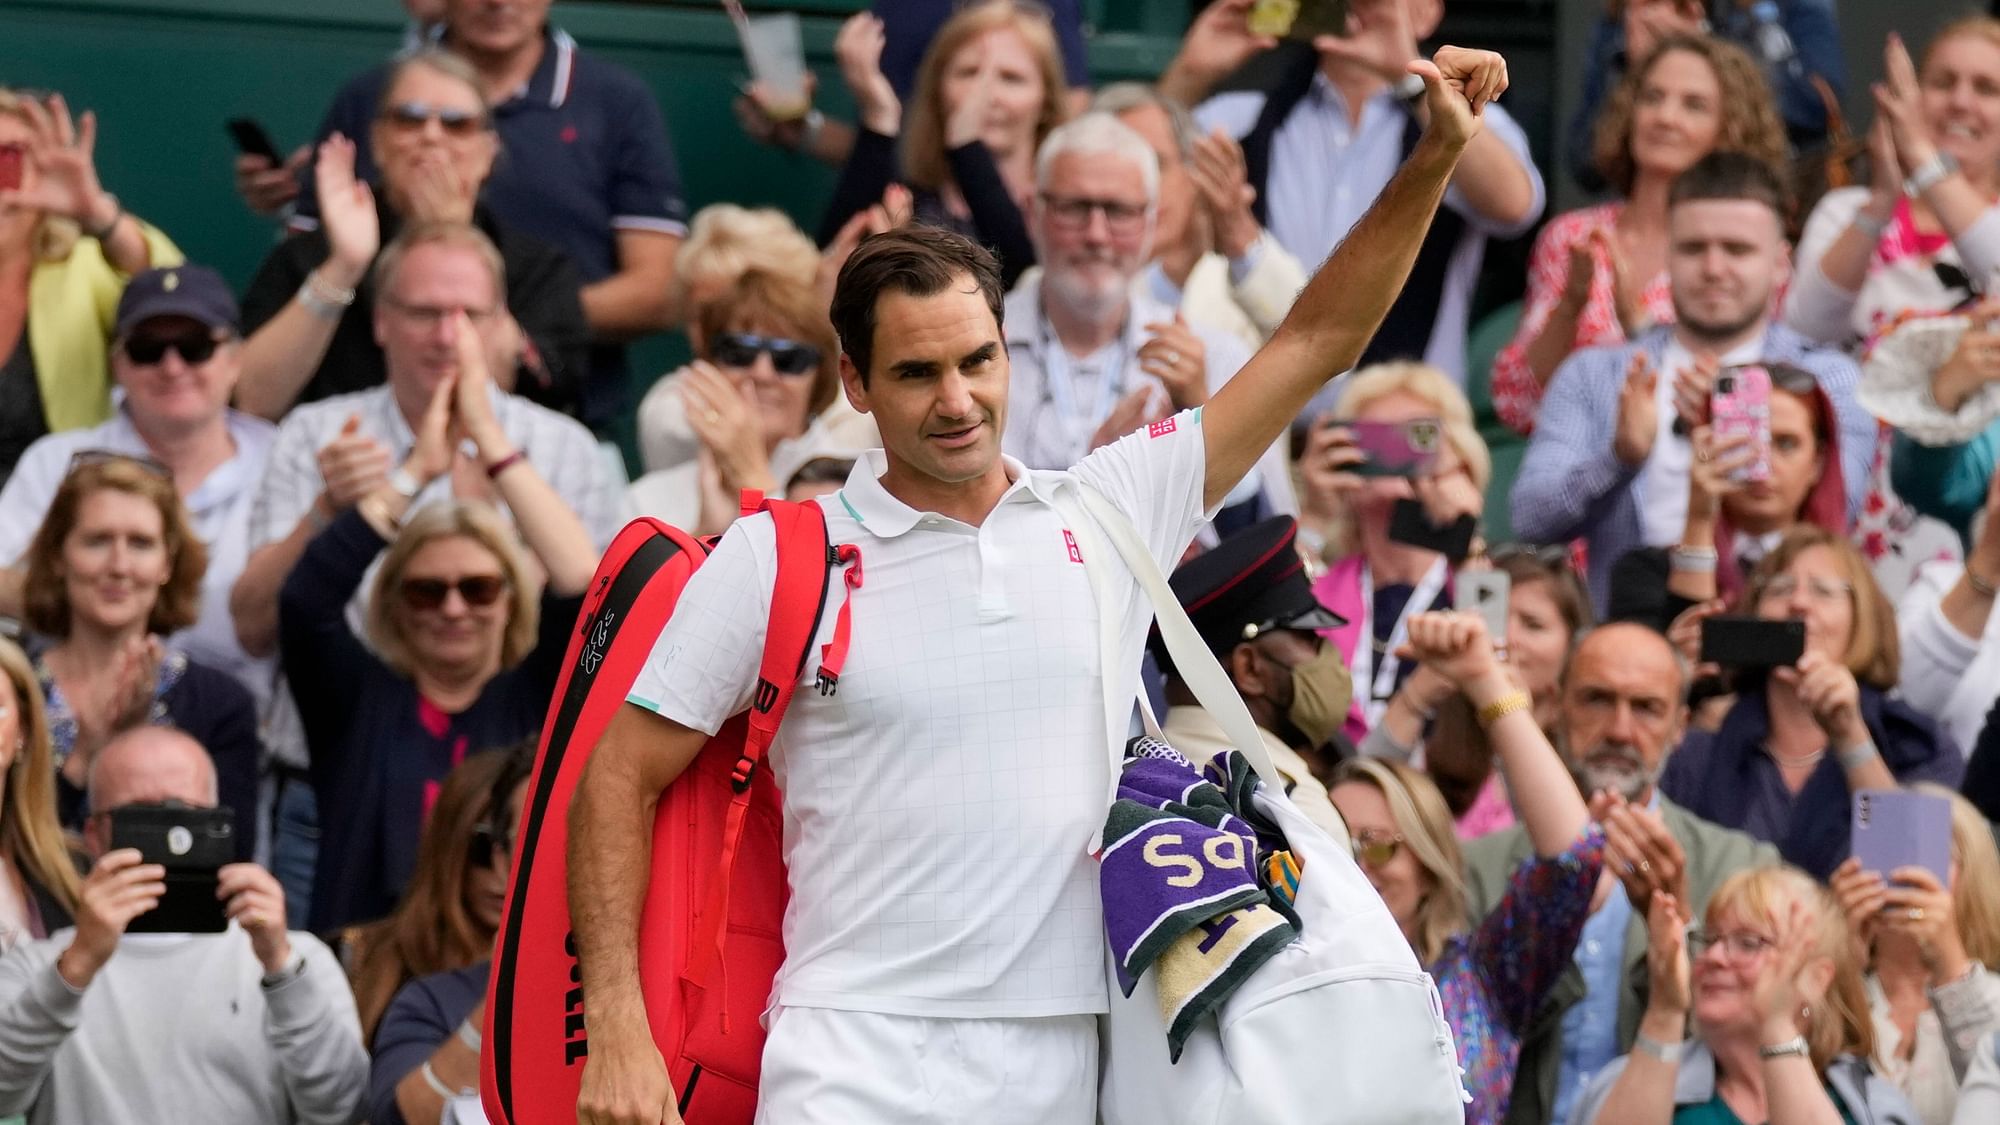 <div class="paragraphs"><p>London: Switzerland's Roger Federer leaves the court after being defeated by Poland's Hubert Hurkacz during the men's singles quarterfinals match on day nine of the Wimbledon Tennis Championships in London.</p></div>